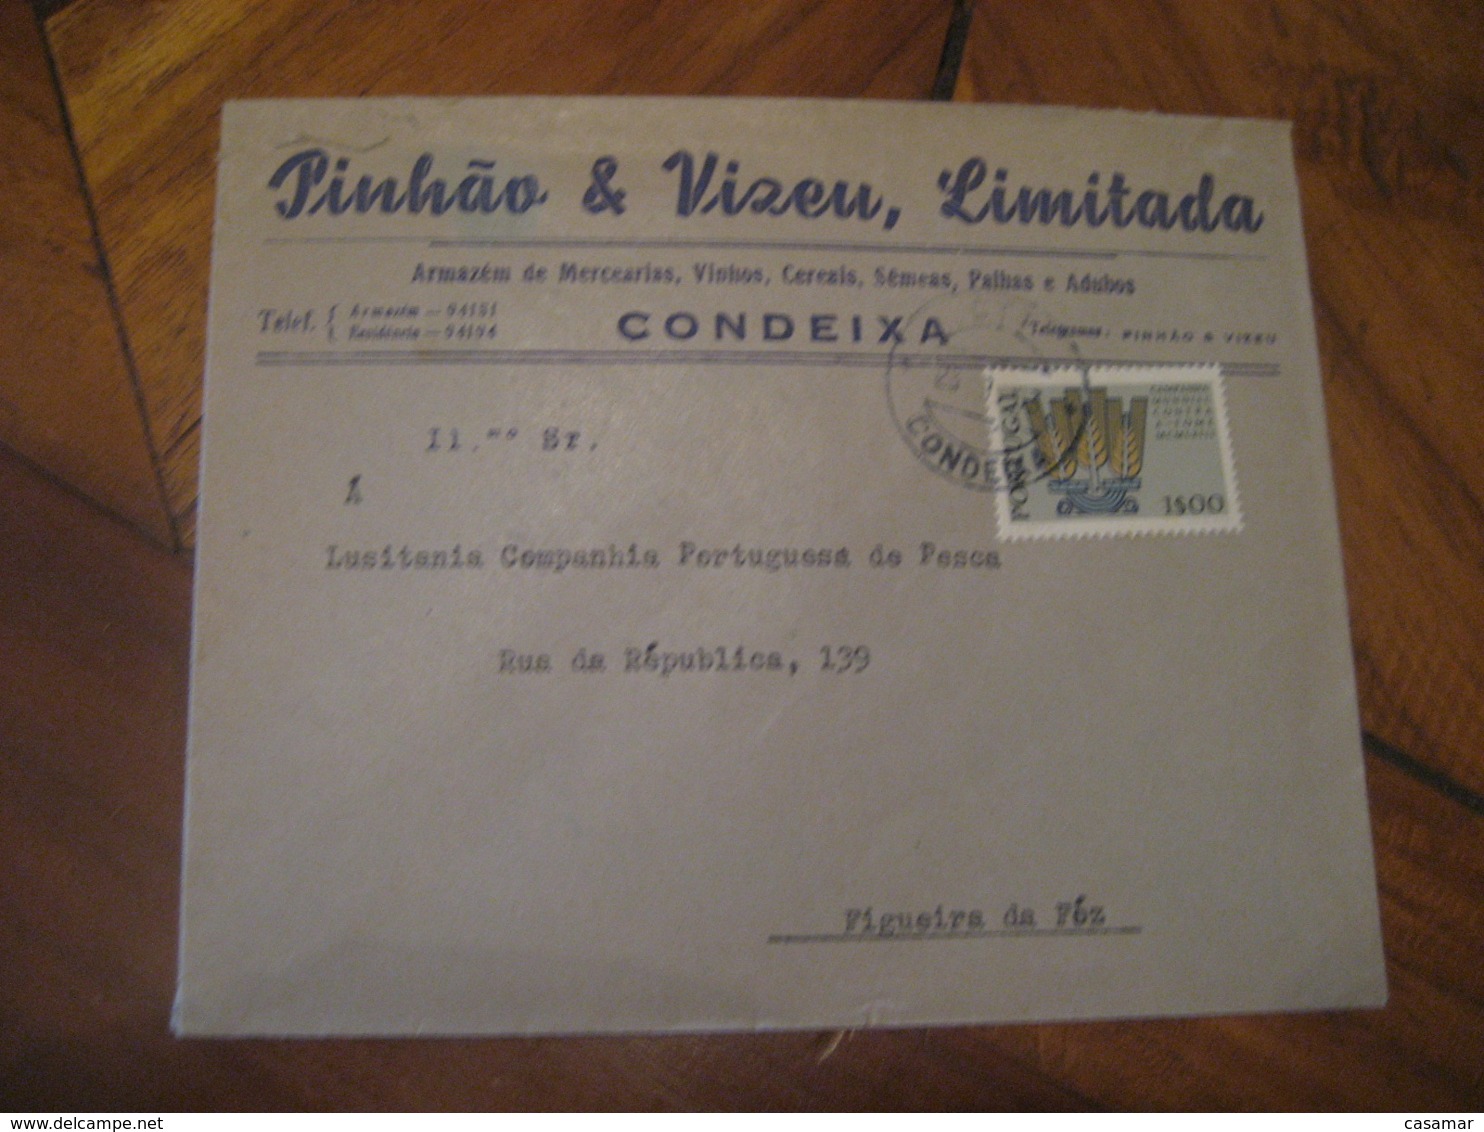 CONDEIXA 1963 To Figueira Da Foz Vinhos ... Wine Enology Drinks Advertising Stamp Cancel Cover PORTUGAL - Lettres & Documents